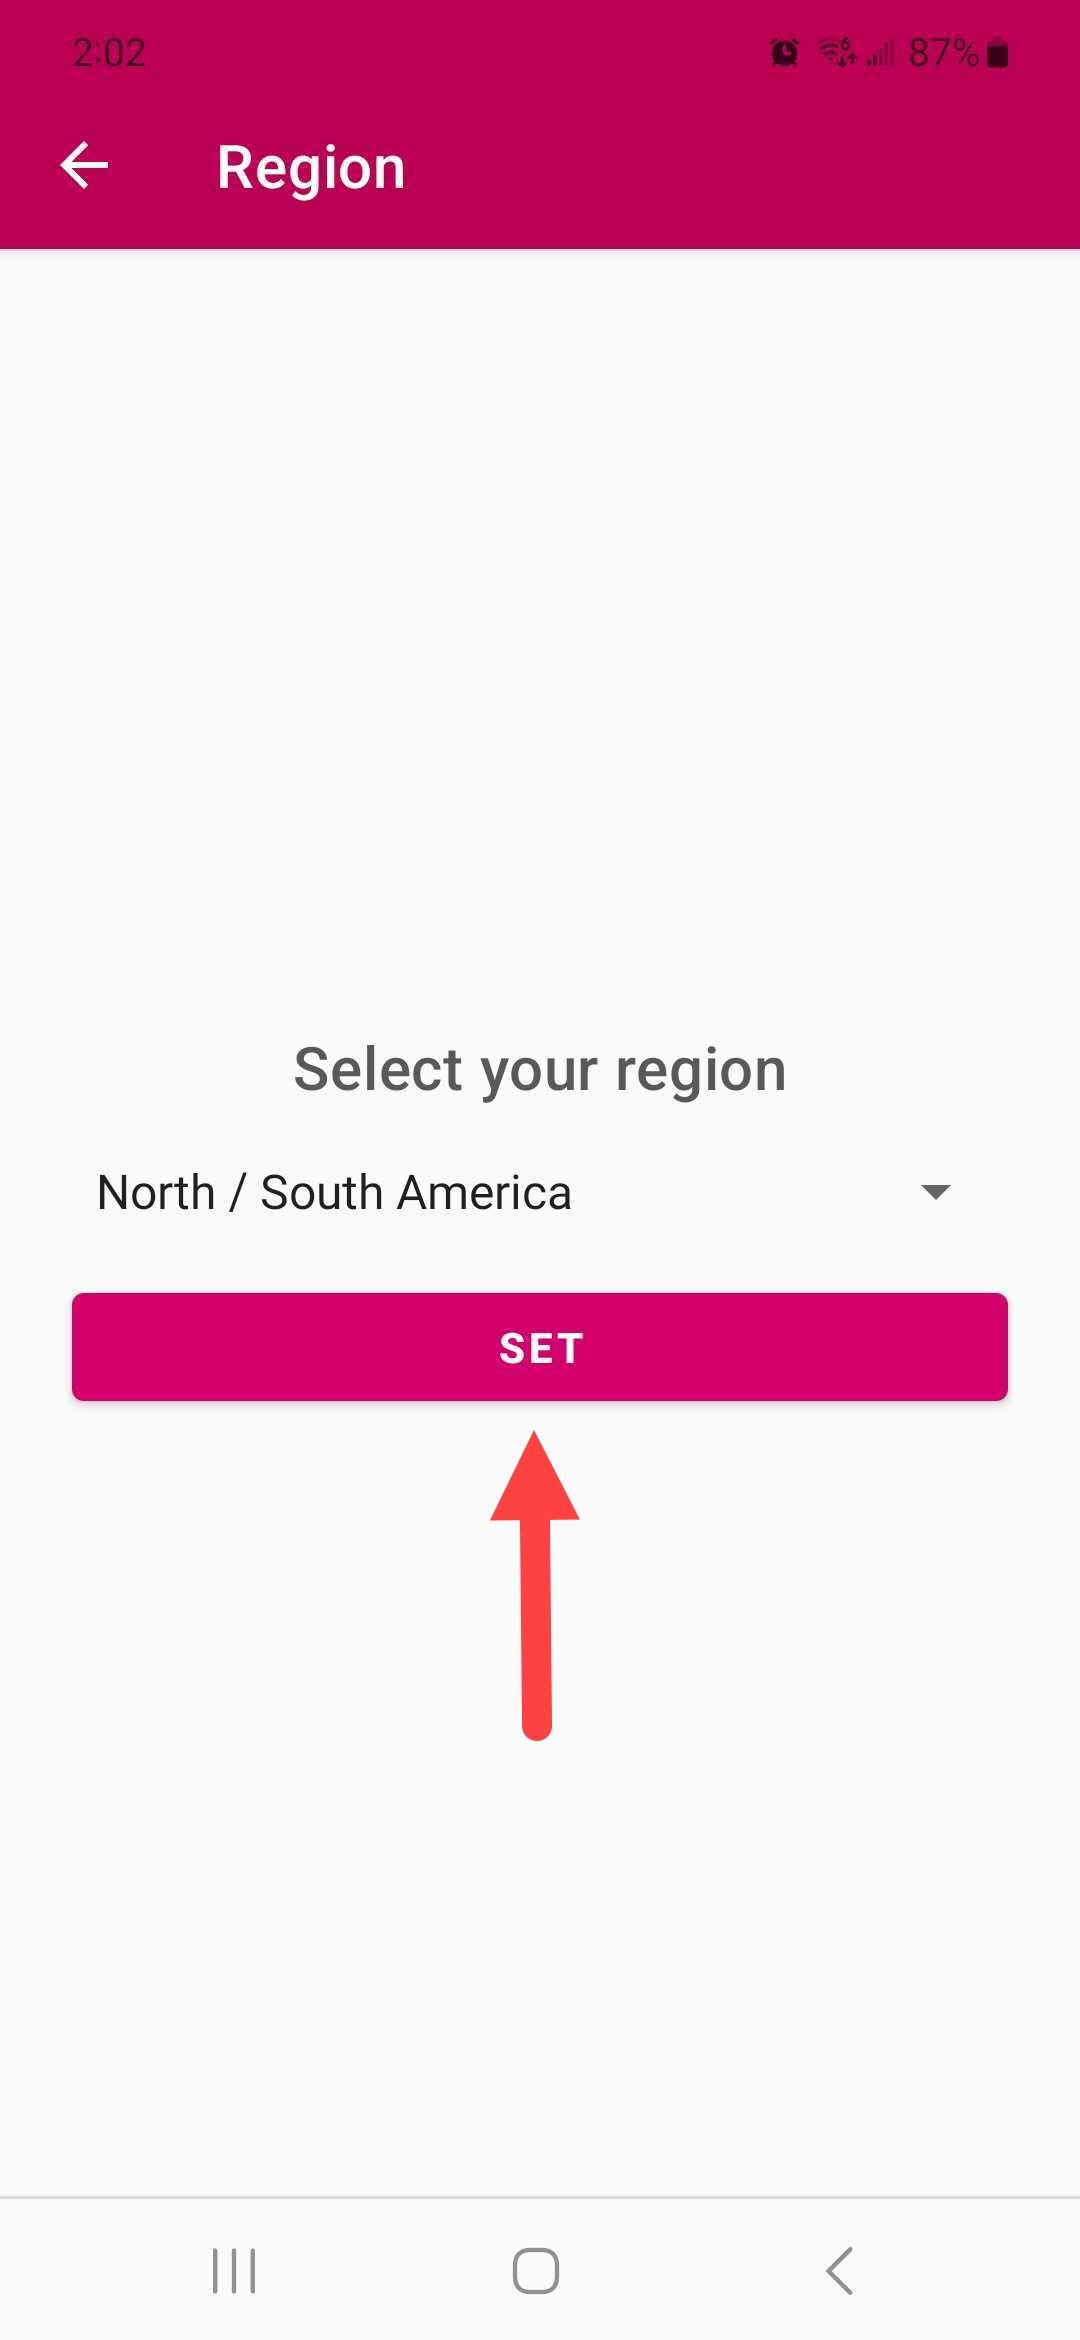 The PointSolutions Region menu with Region options and Save identified as described for Android